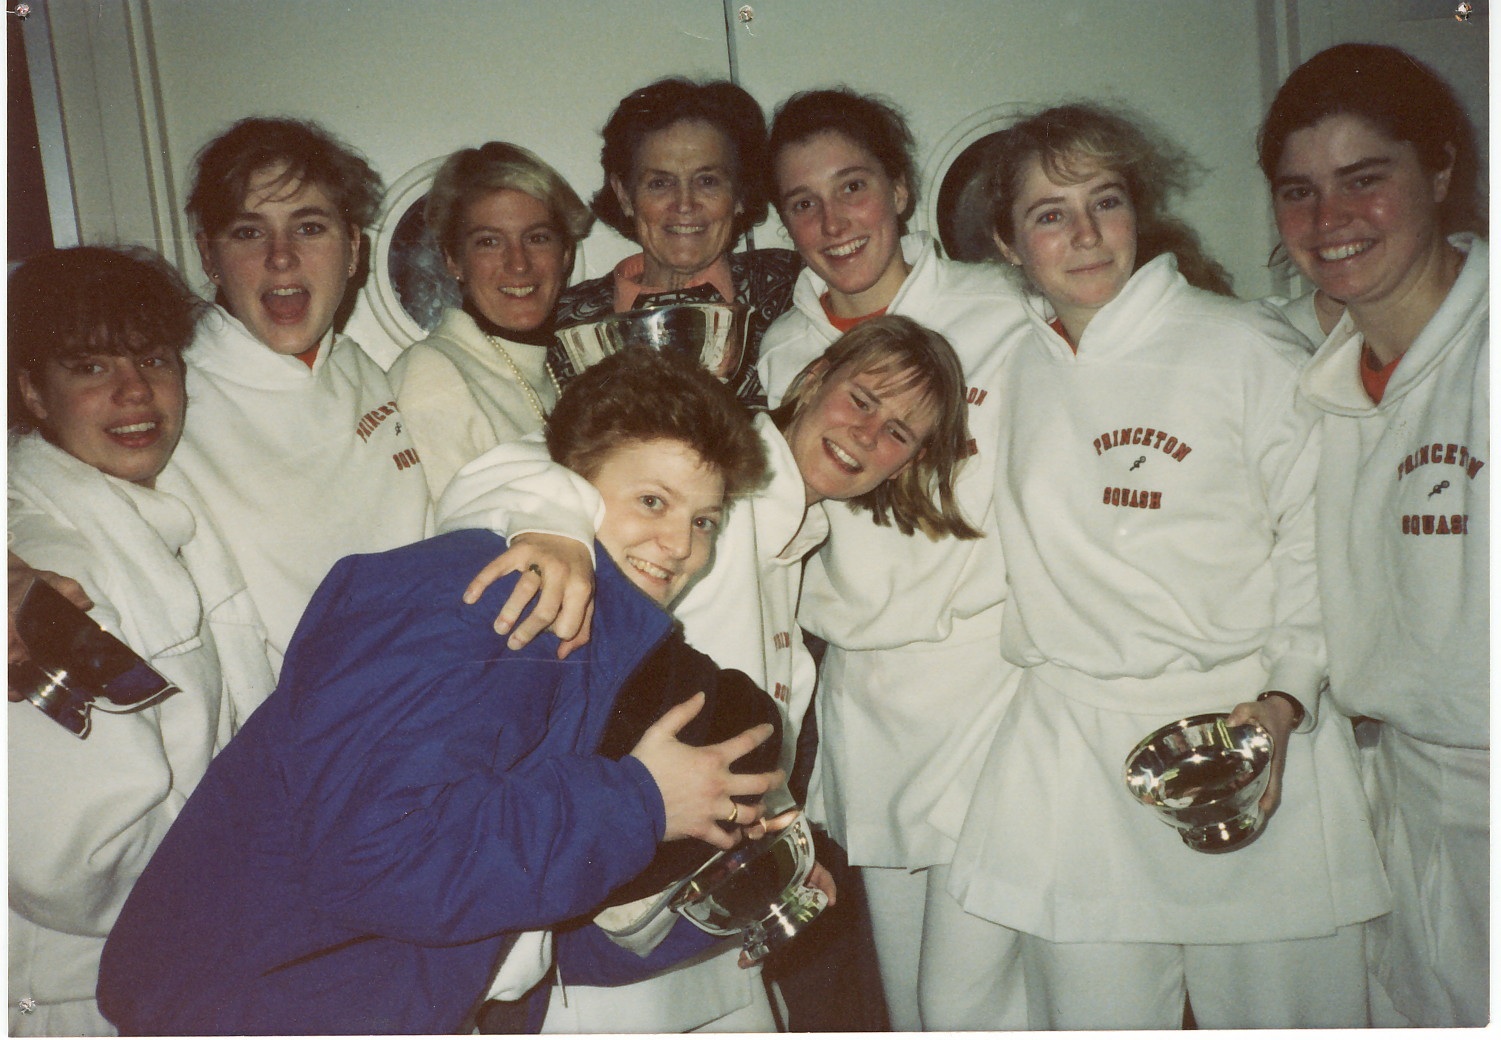 (L-R): In 1989, Princeton again won the Howe Cup, for the 11th time. On that team were Jen P. Roos (‘92), Mary Belknap (‘92), Ann Clark (‘80, Asst. Coach), Mary Foulk (‘91), Constable, Ann Sawyer (‘89), Hope MacKay (‘92), Elizabeth Van Orman (‘92), and Demer Holleran (‘89).